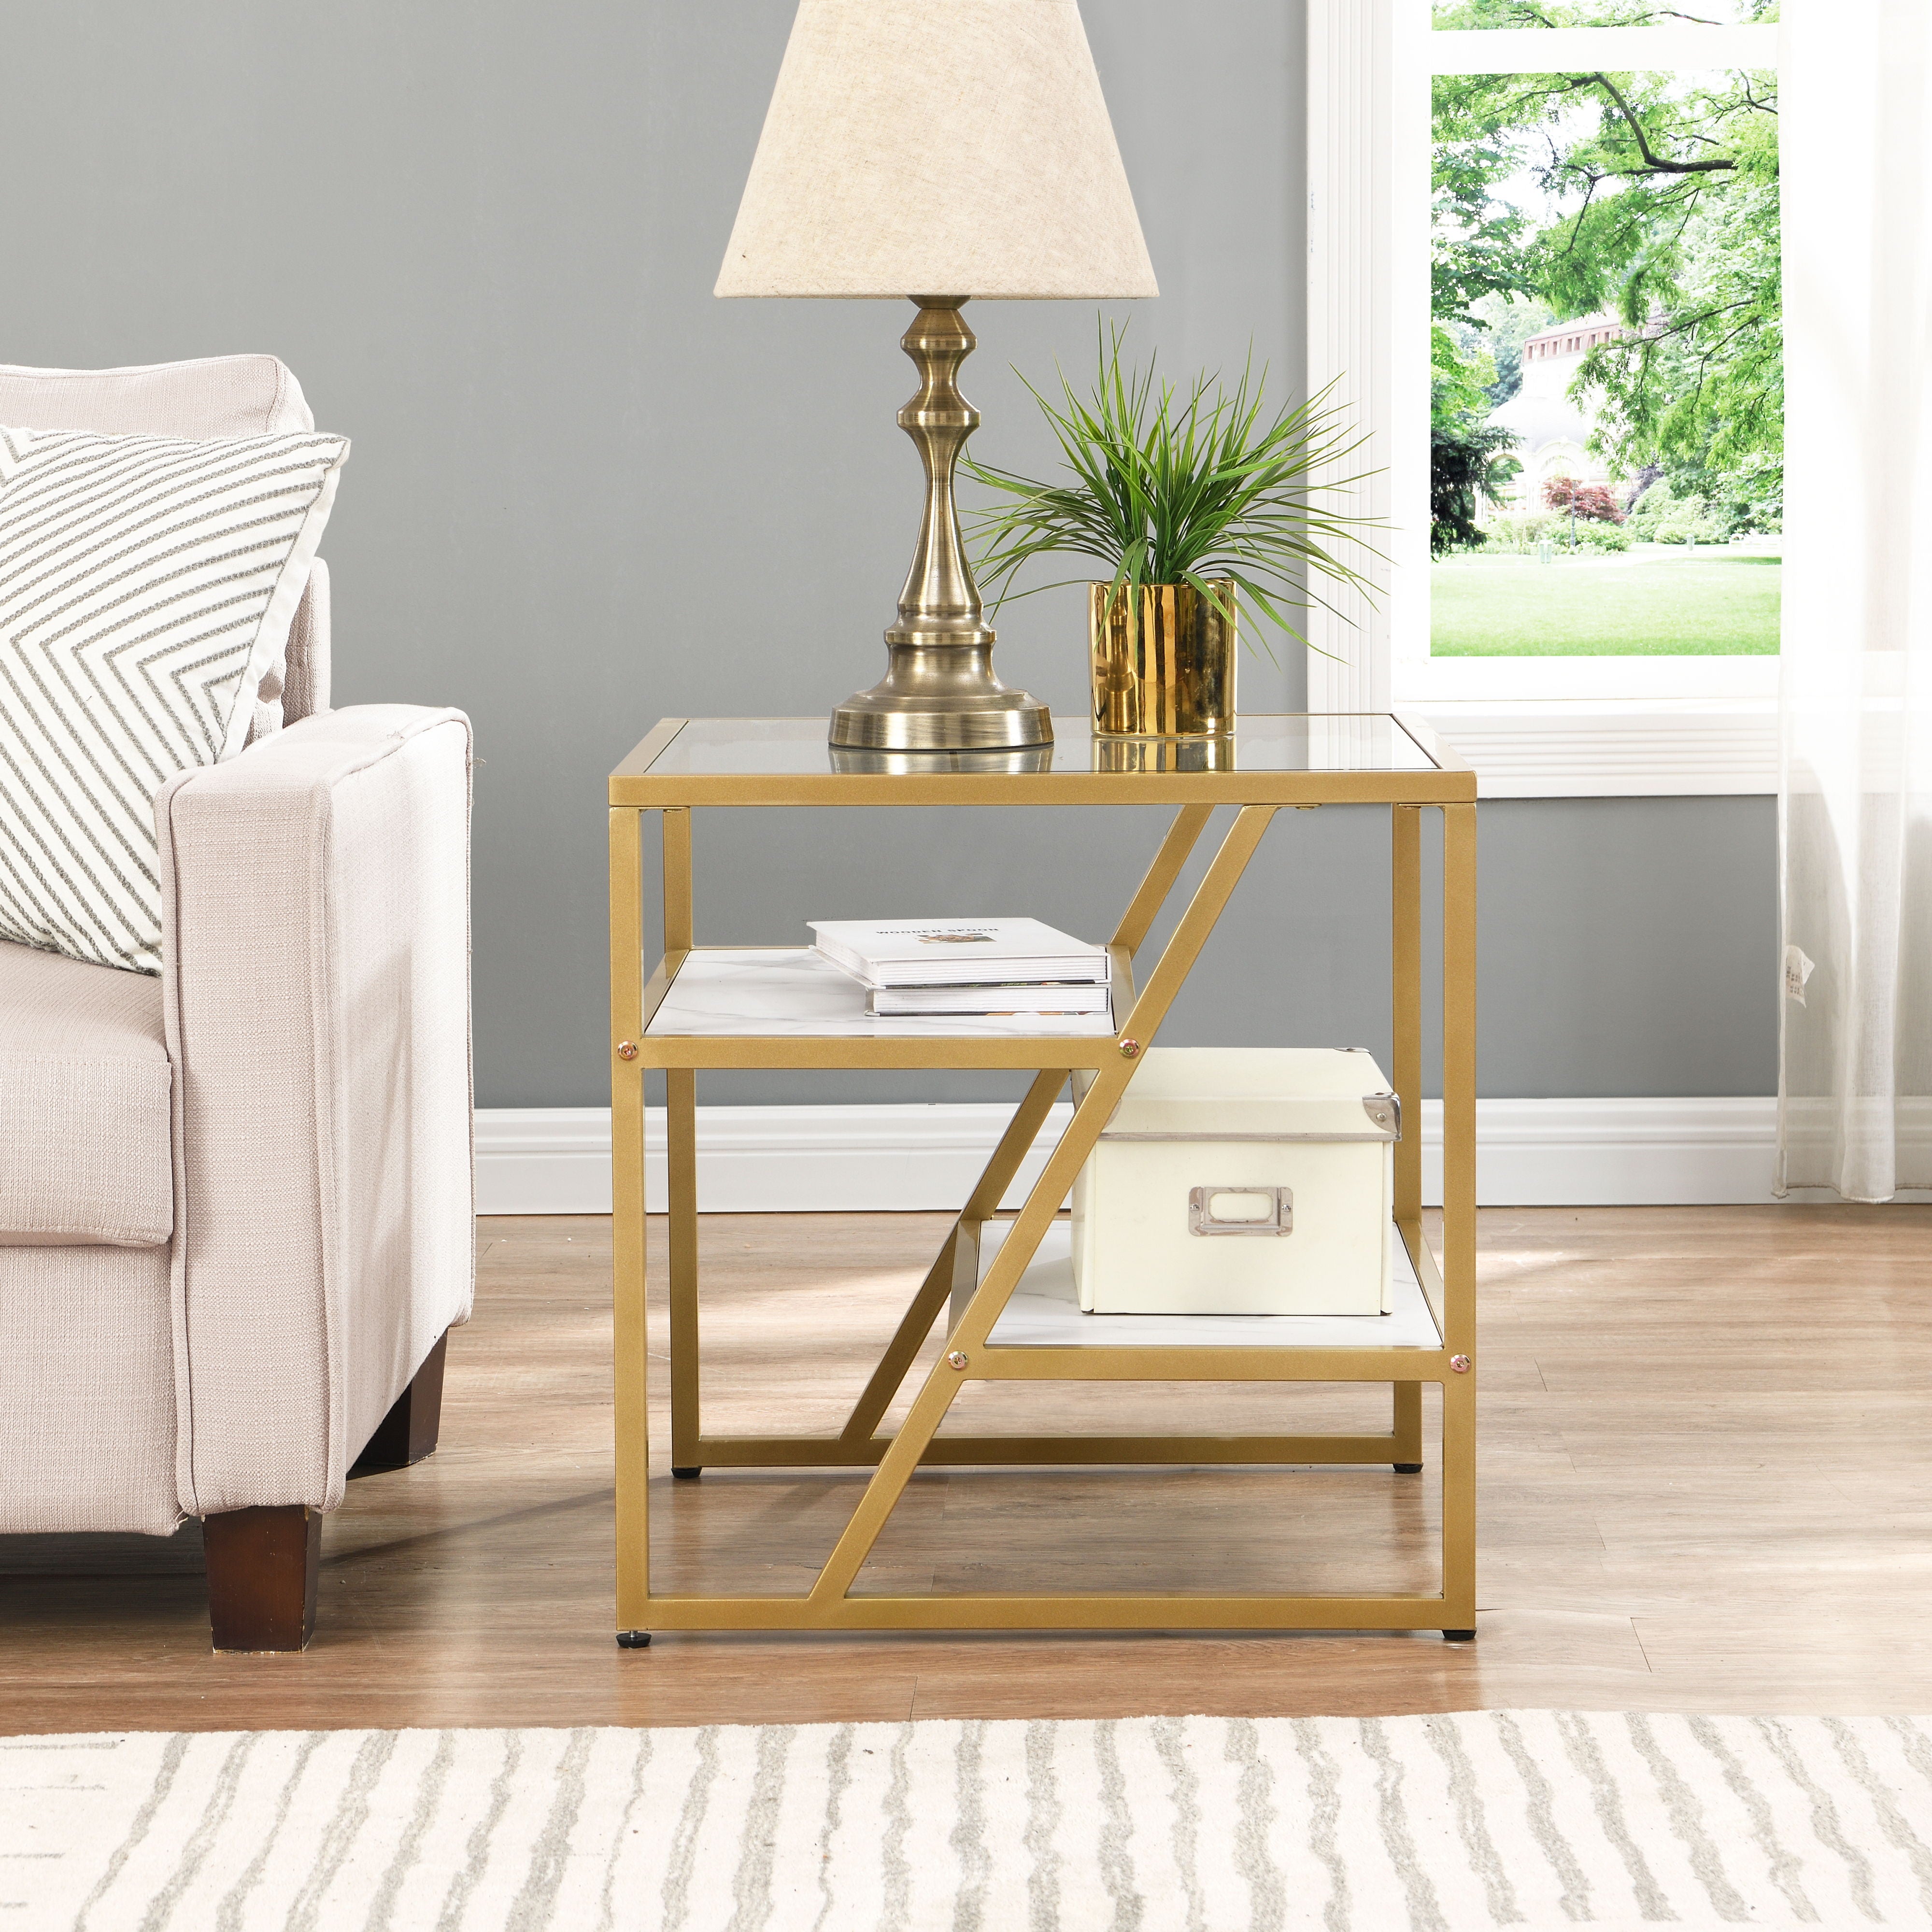 Golden Side Table, End Table With Storage Shelf, Tempered Glass Coffee Table With Metal Frame For Living Room & Bed Room,